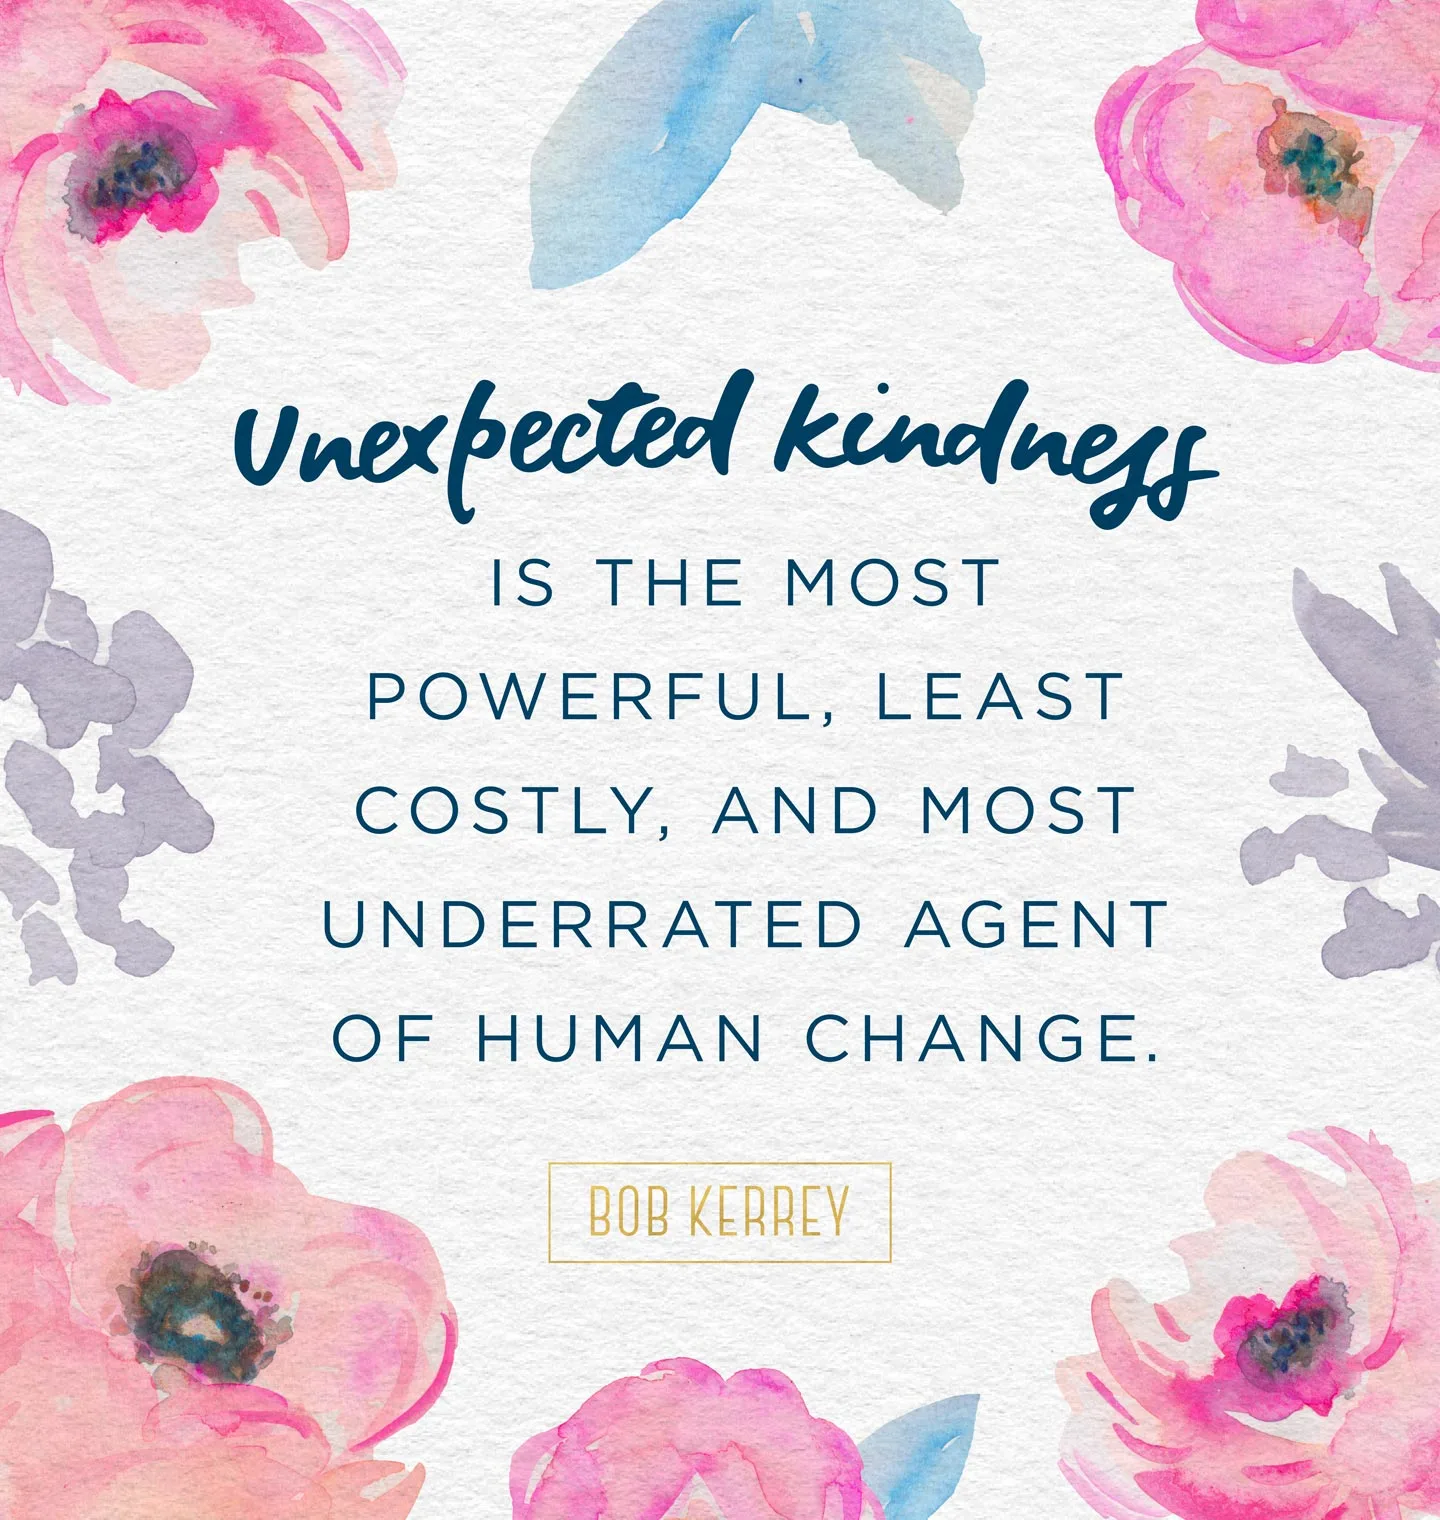 30 Inspiring Kindness Quotes That Will Enlighten You